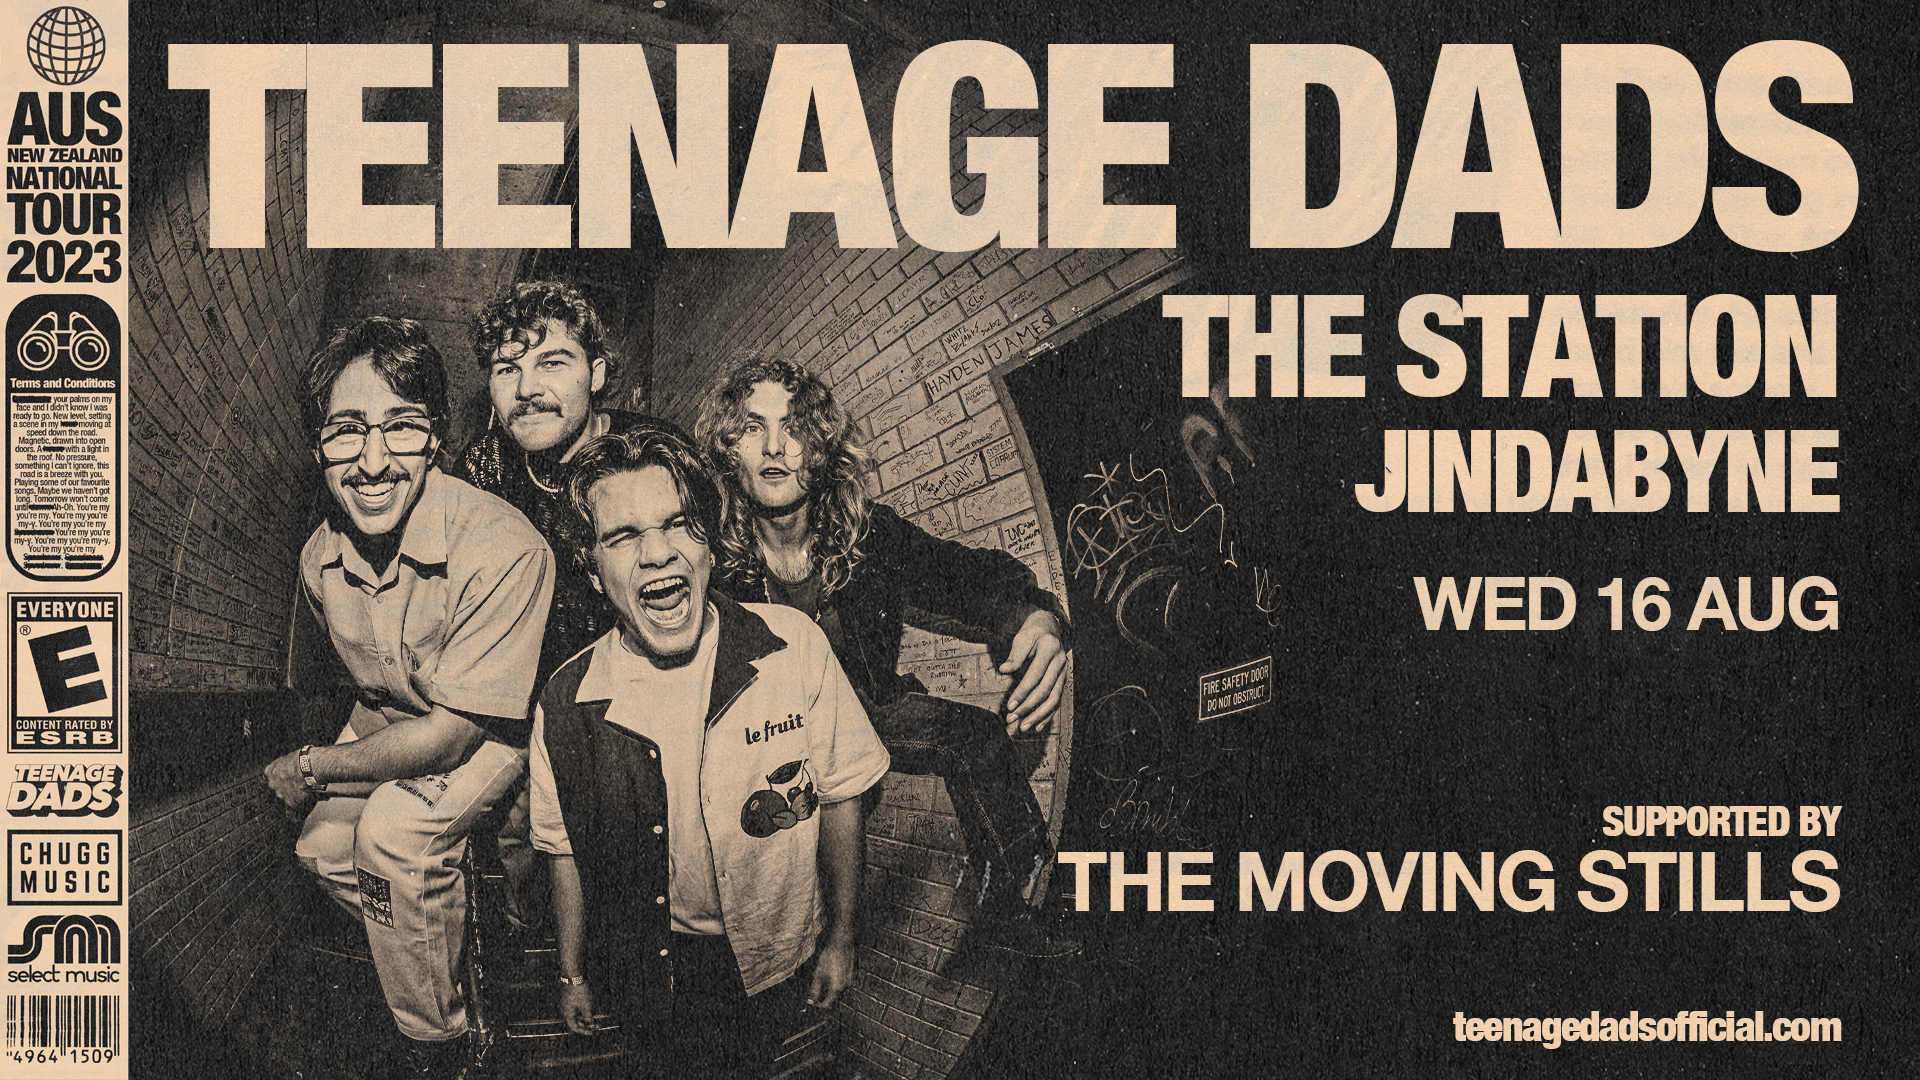 Teenage Dads tour poster with The Moving Stills